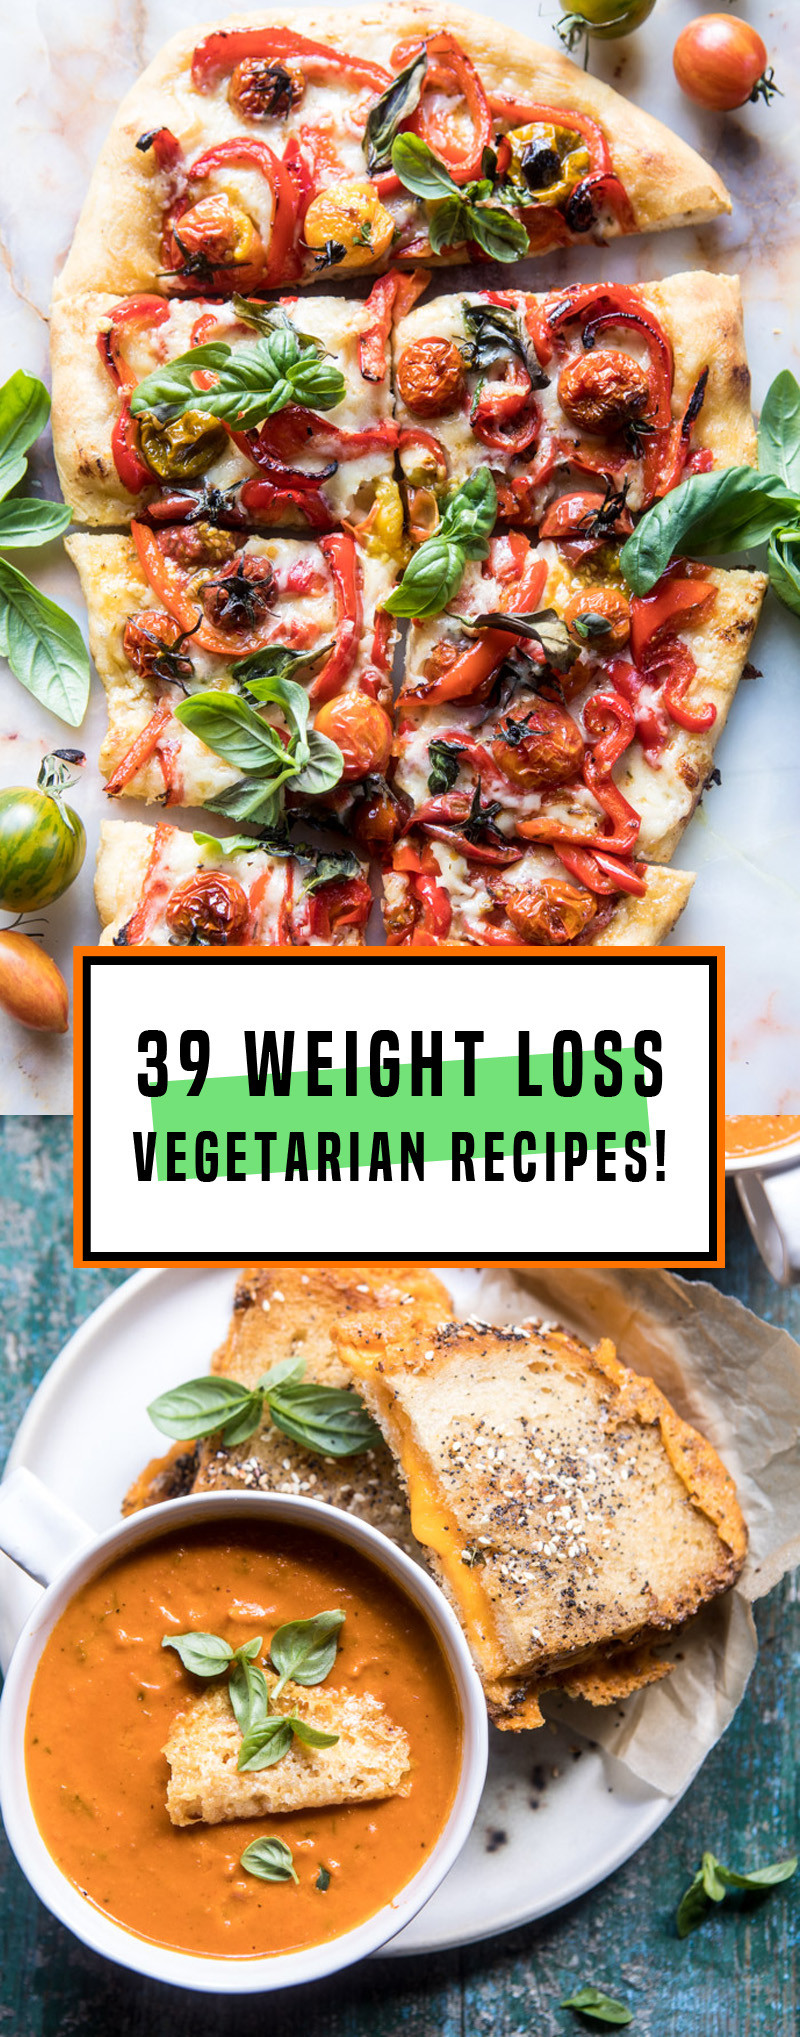 Healthy Vegetarian Recipes For Weight Loss
 39 Ve arian Weight Loss Recipes That Are Healthy And